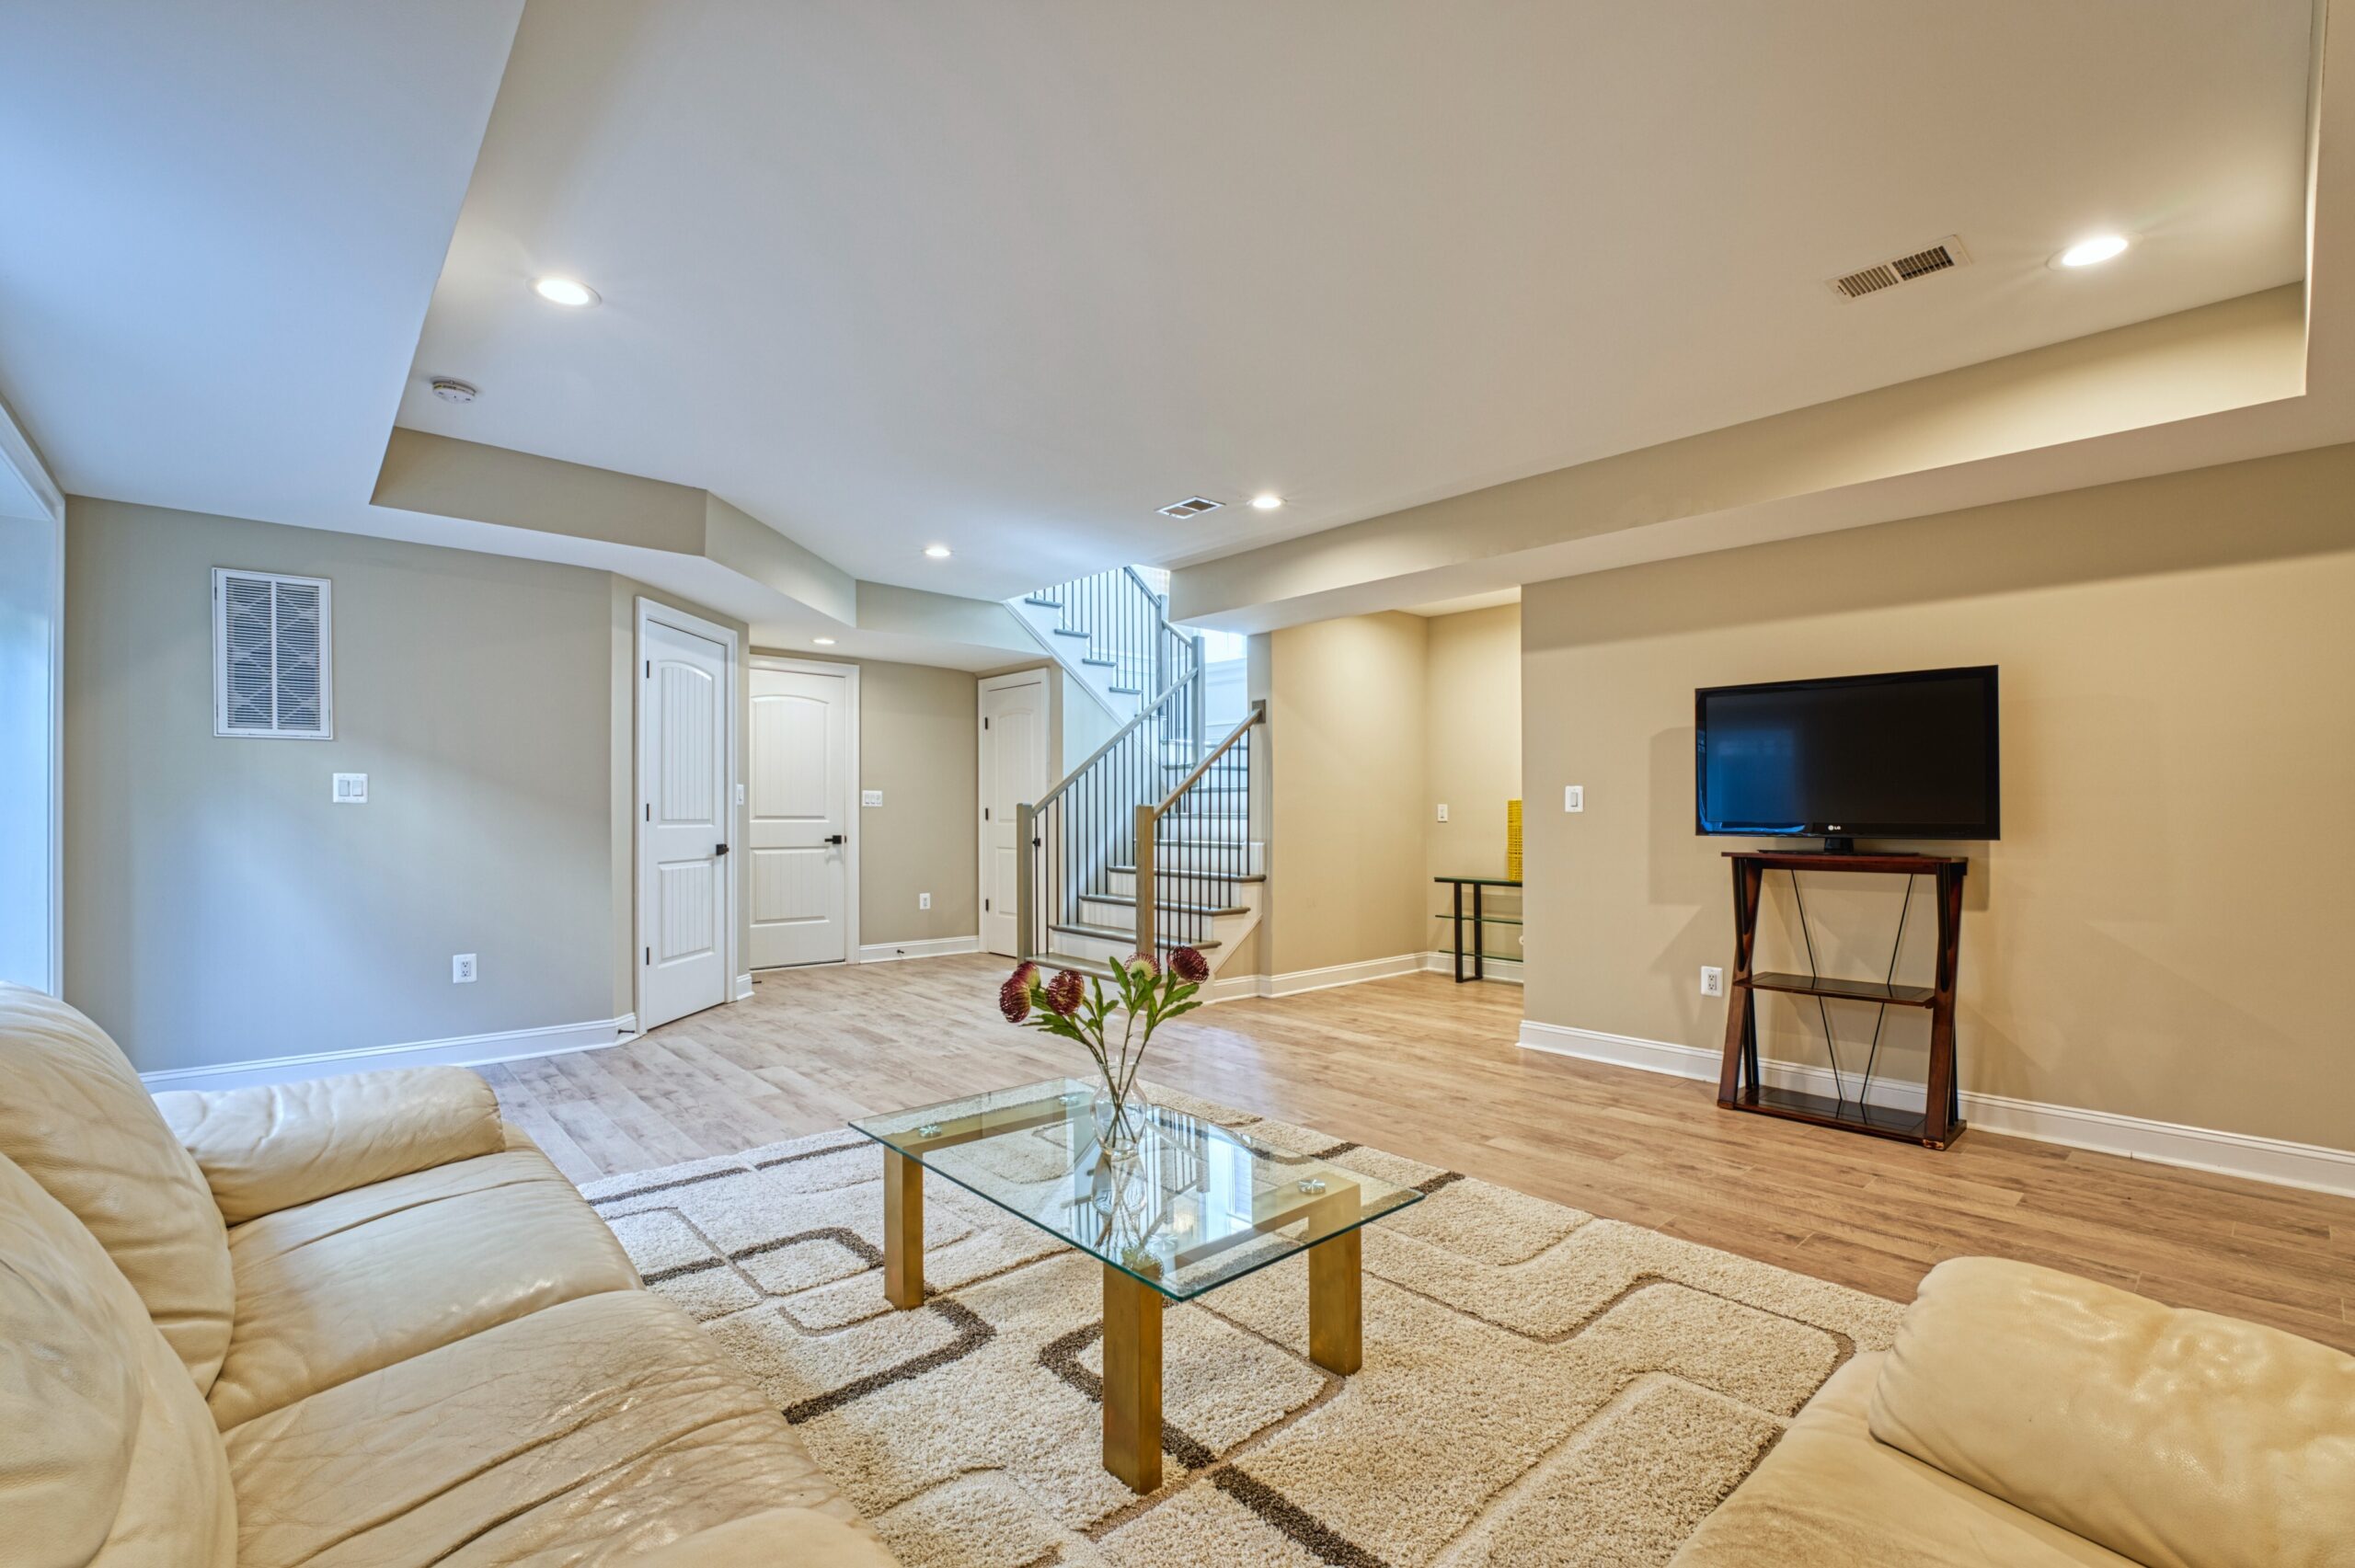 professional Fusion photo of the interior of a home in McLean, VA - showing basement living room with wide tray ceiling